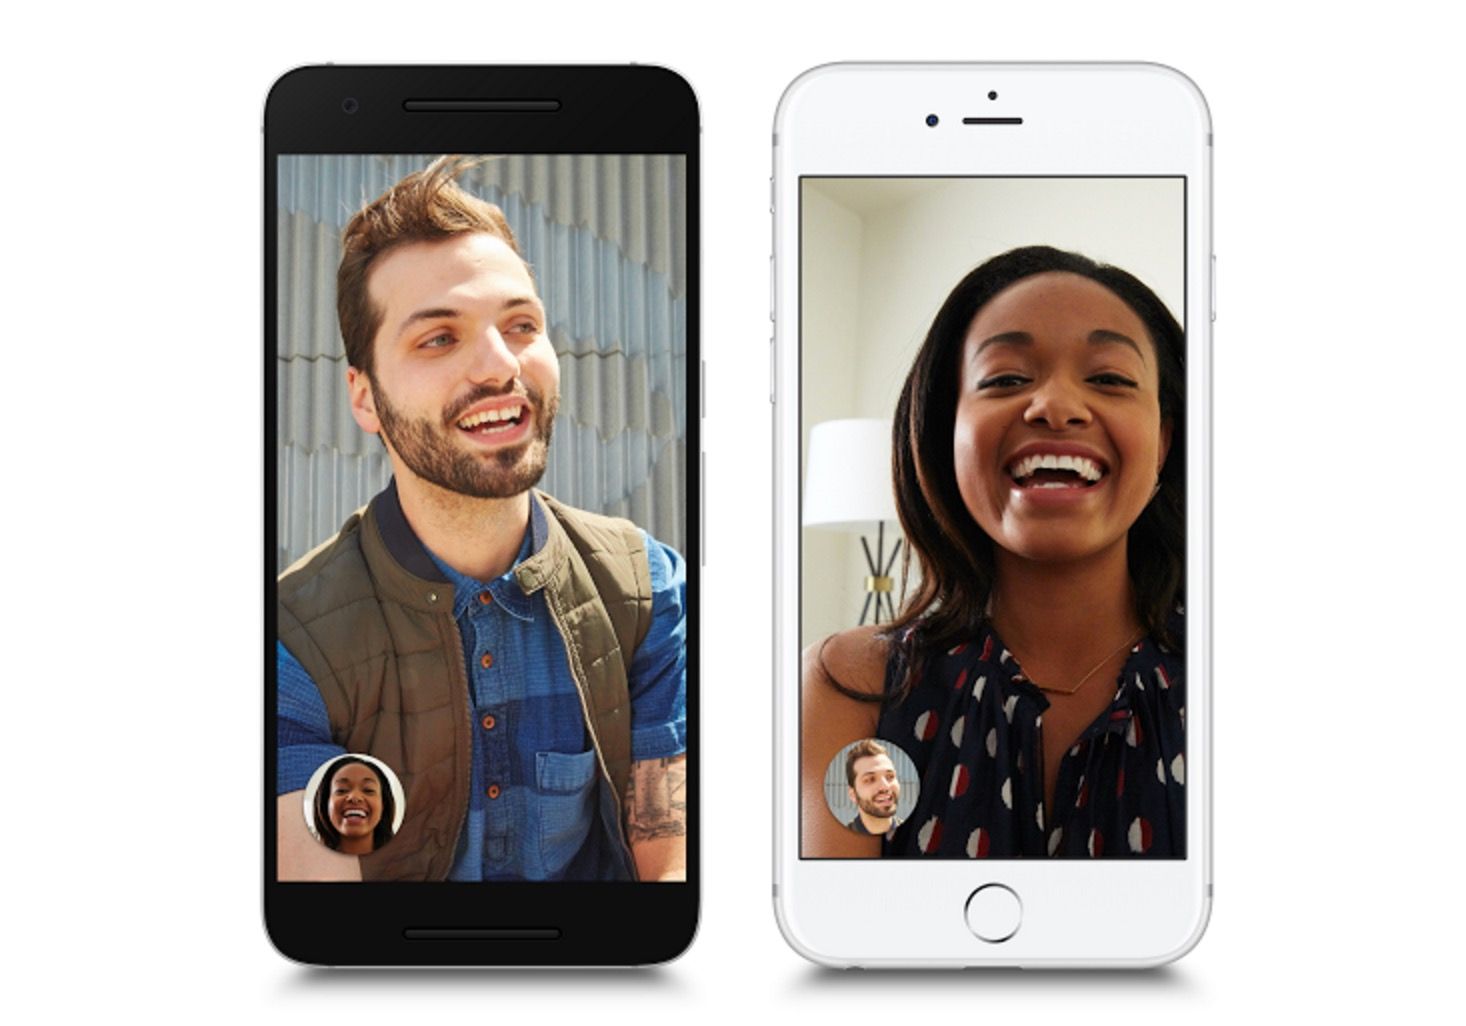 Google Duo has increased its group video calling support to 12 participants image 1